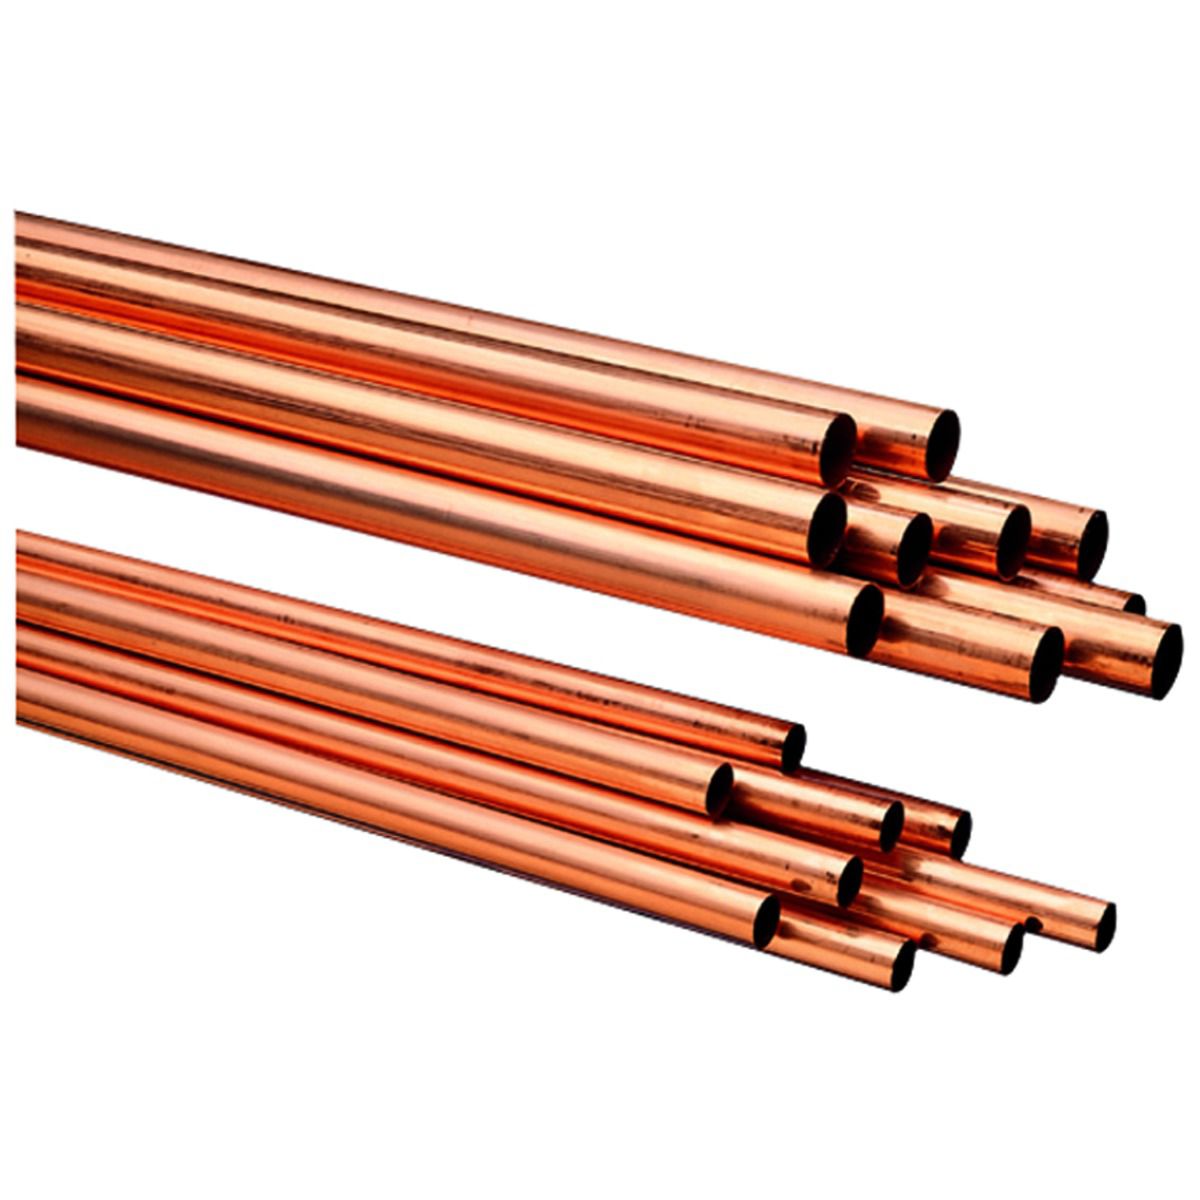 Image of Wednesbury Copper Pipe 22mm x 2m Pack 10